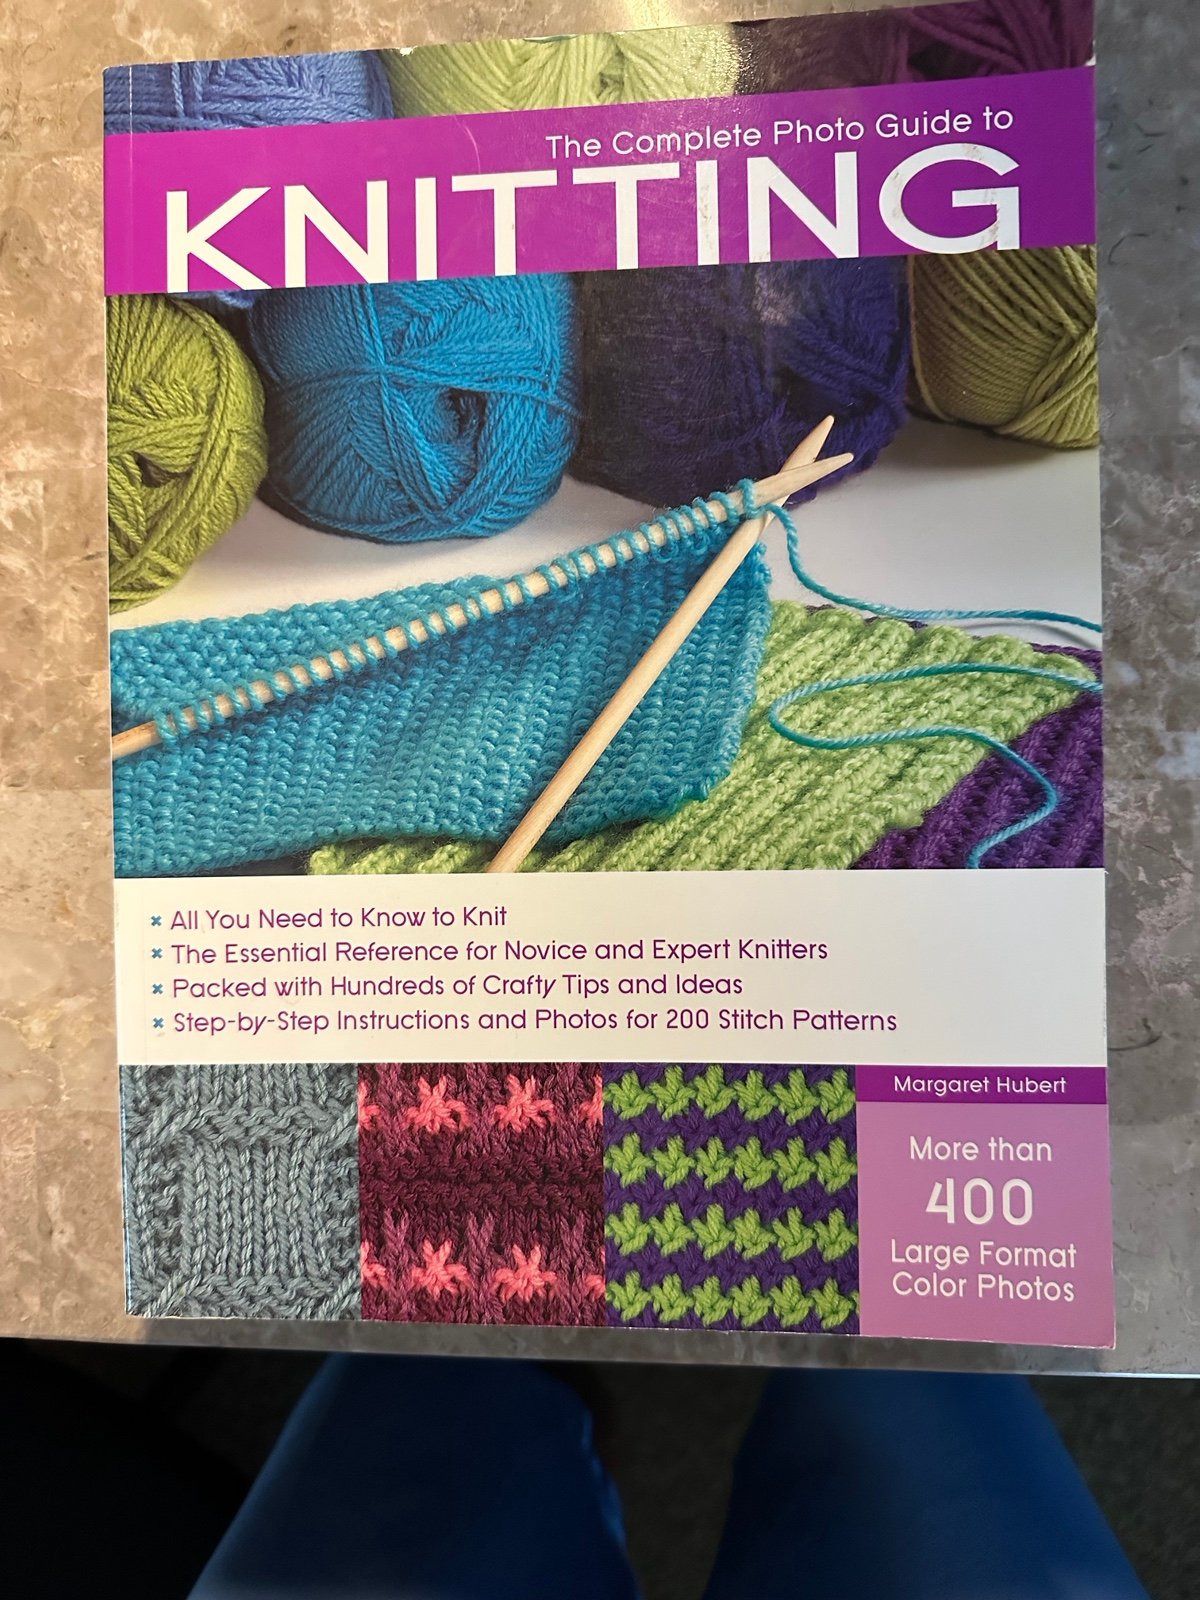 The Complete Photo Guide to Knitting rSZm6Vwwu